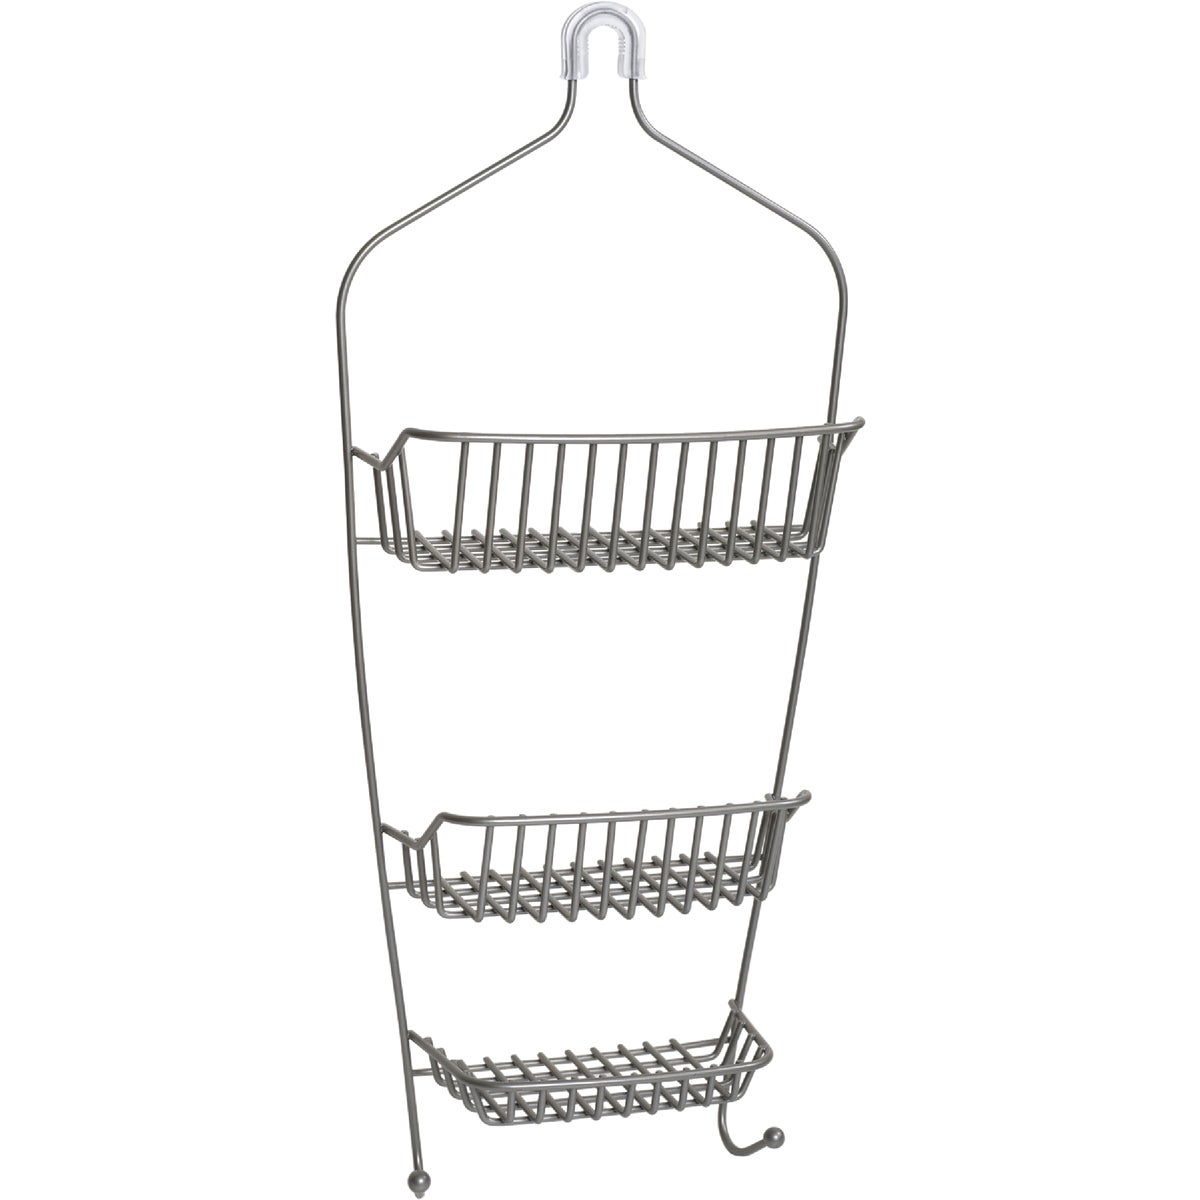 Item 453471, Satin nickel over-the-shower caddy.